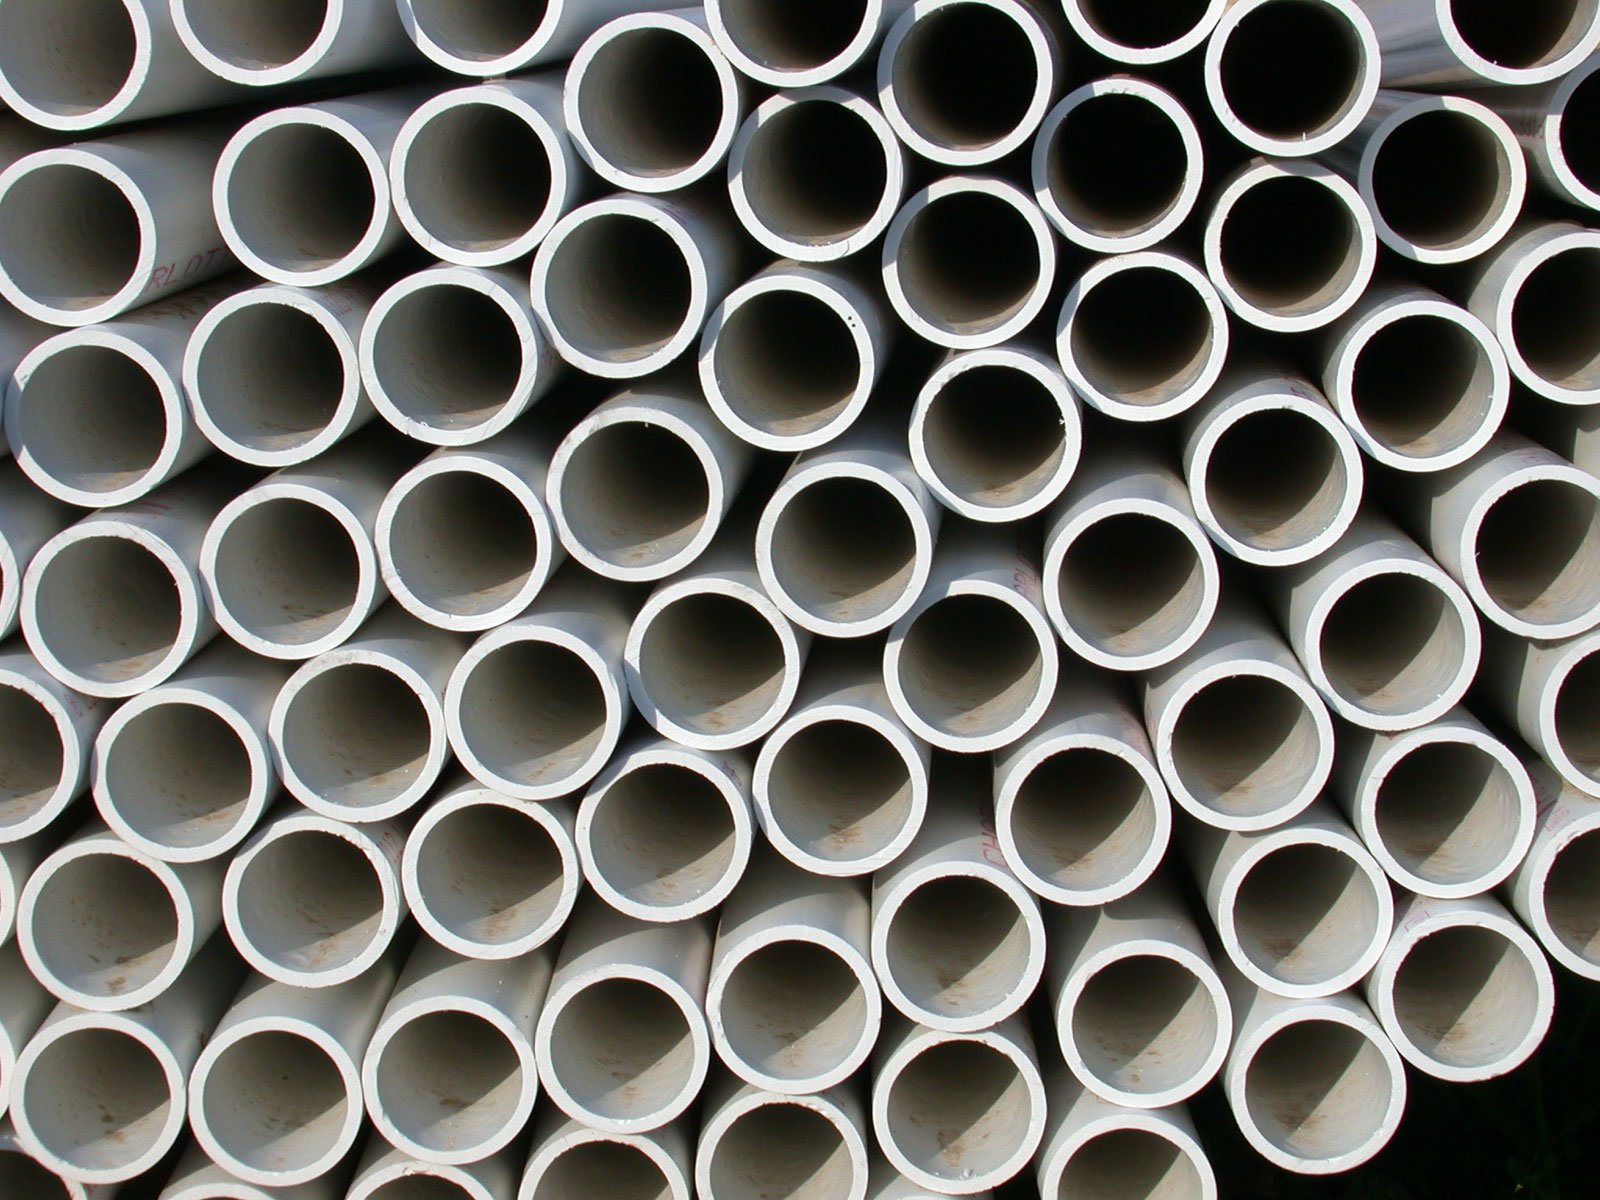 white piping are stacked up to be used for drainage